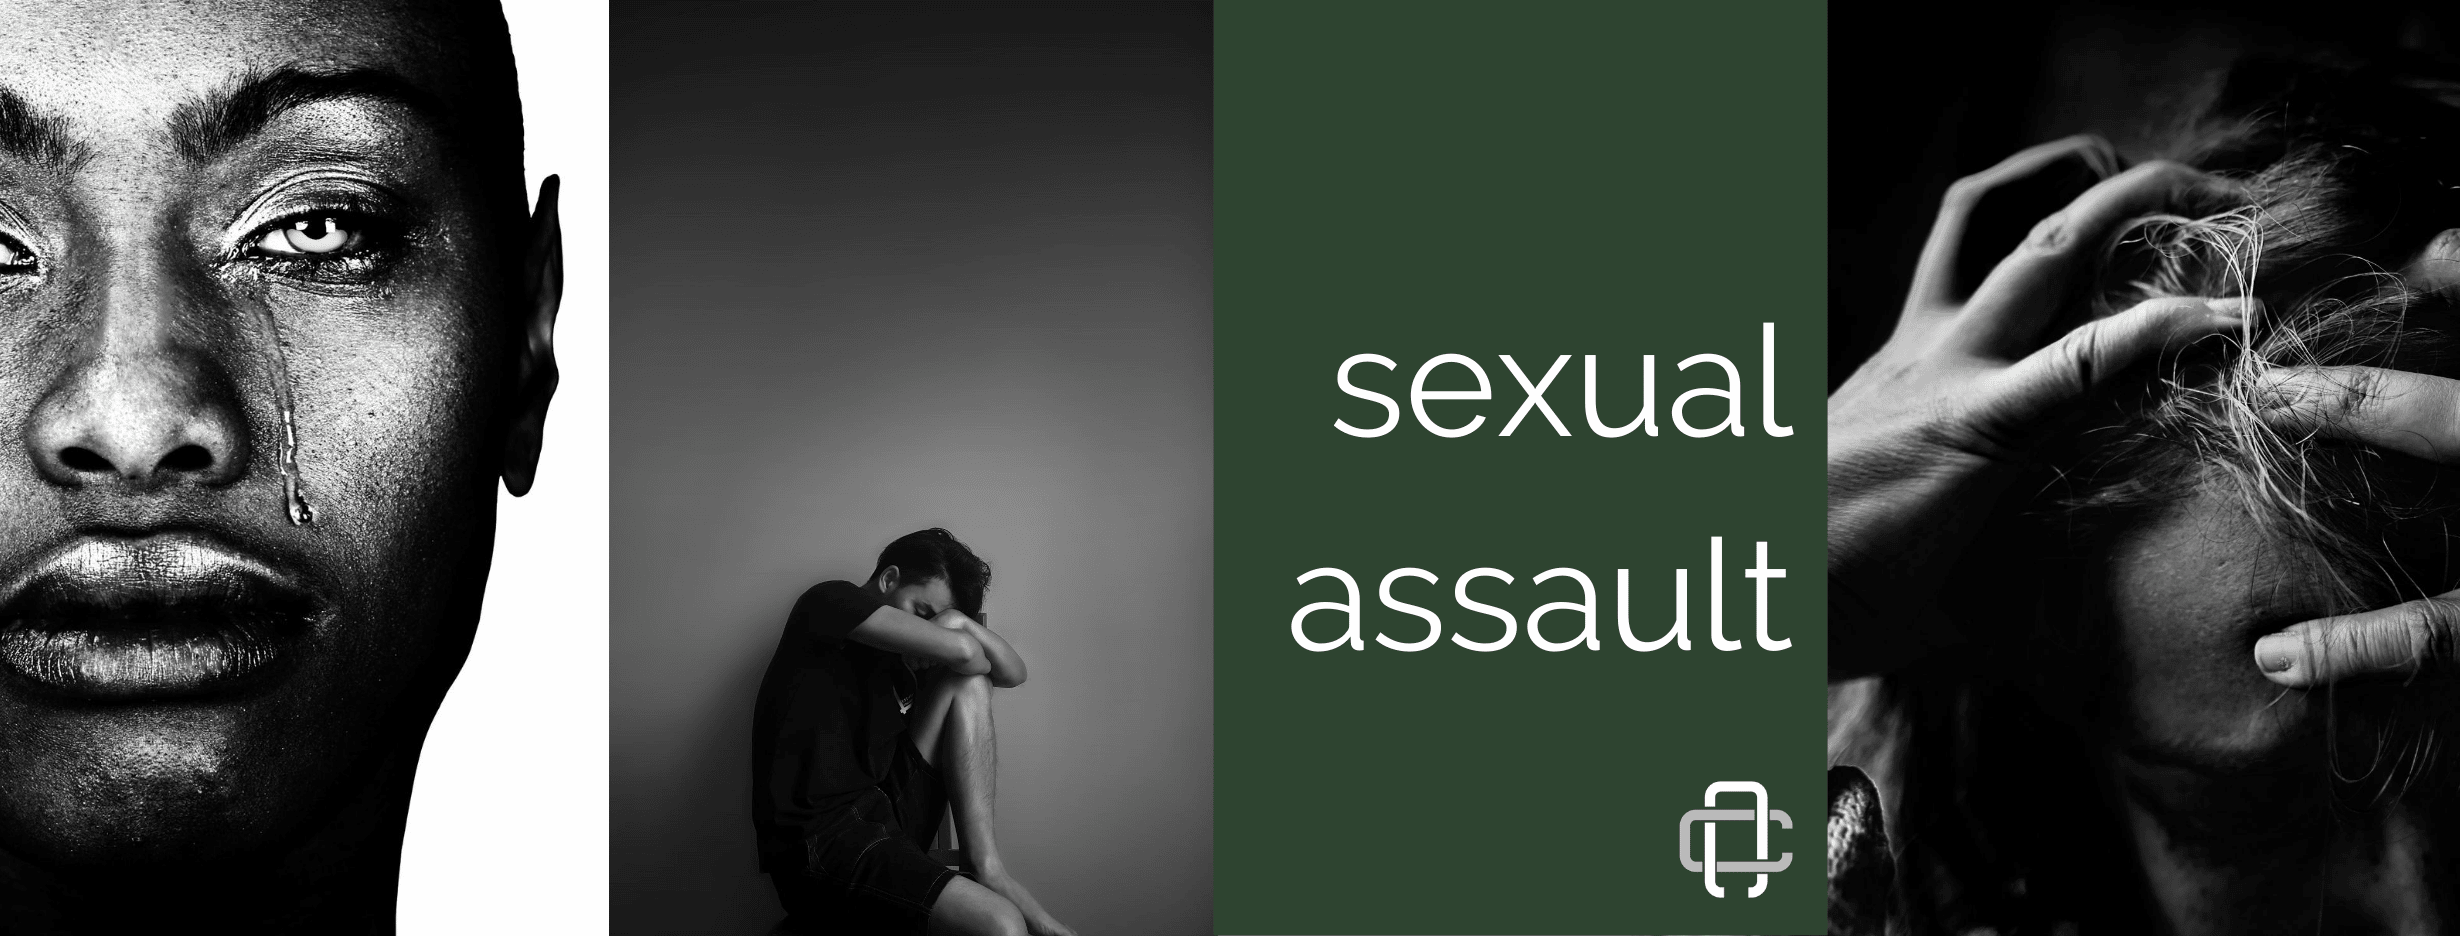 Sexual Assault Lawyer | Carter Law Group